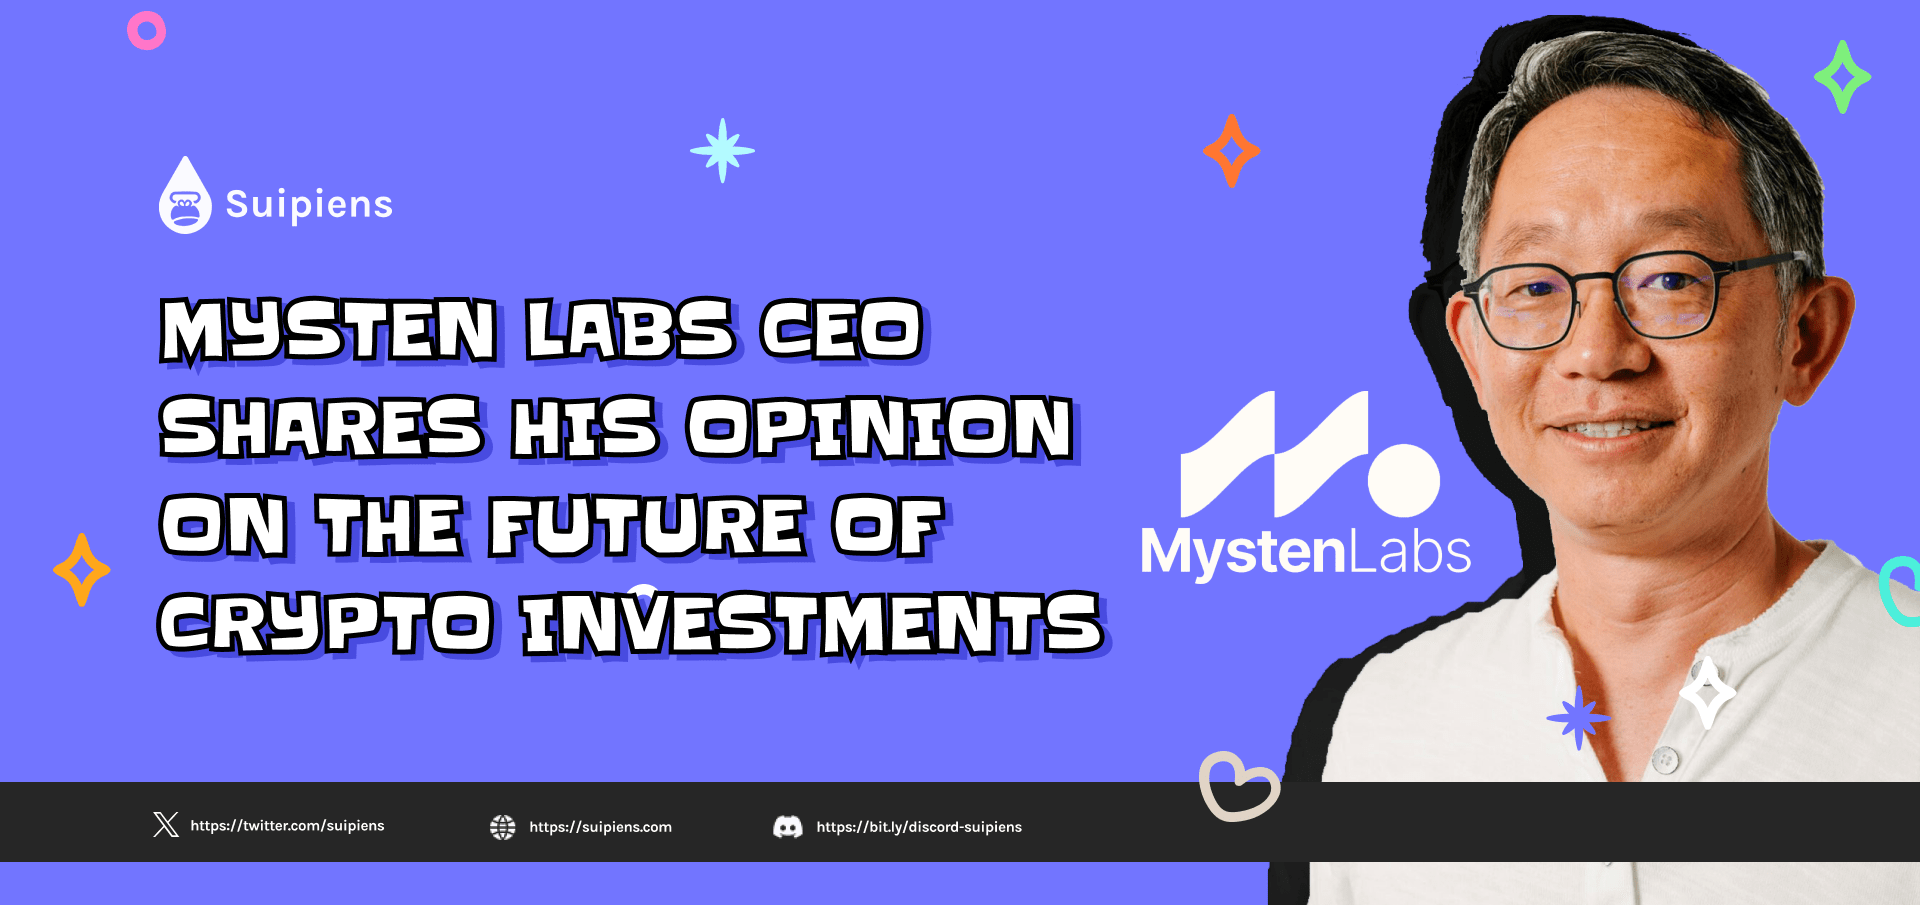 Mysten Labs CEO Shares His Opinion on the Future of Crypto Investments